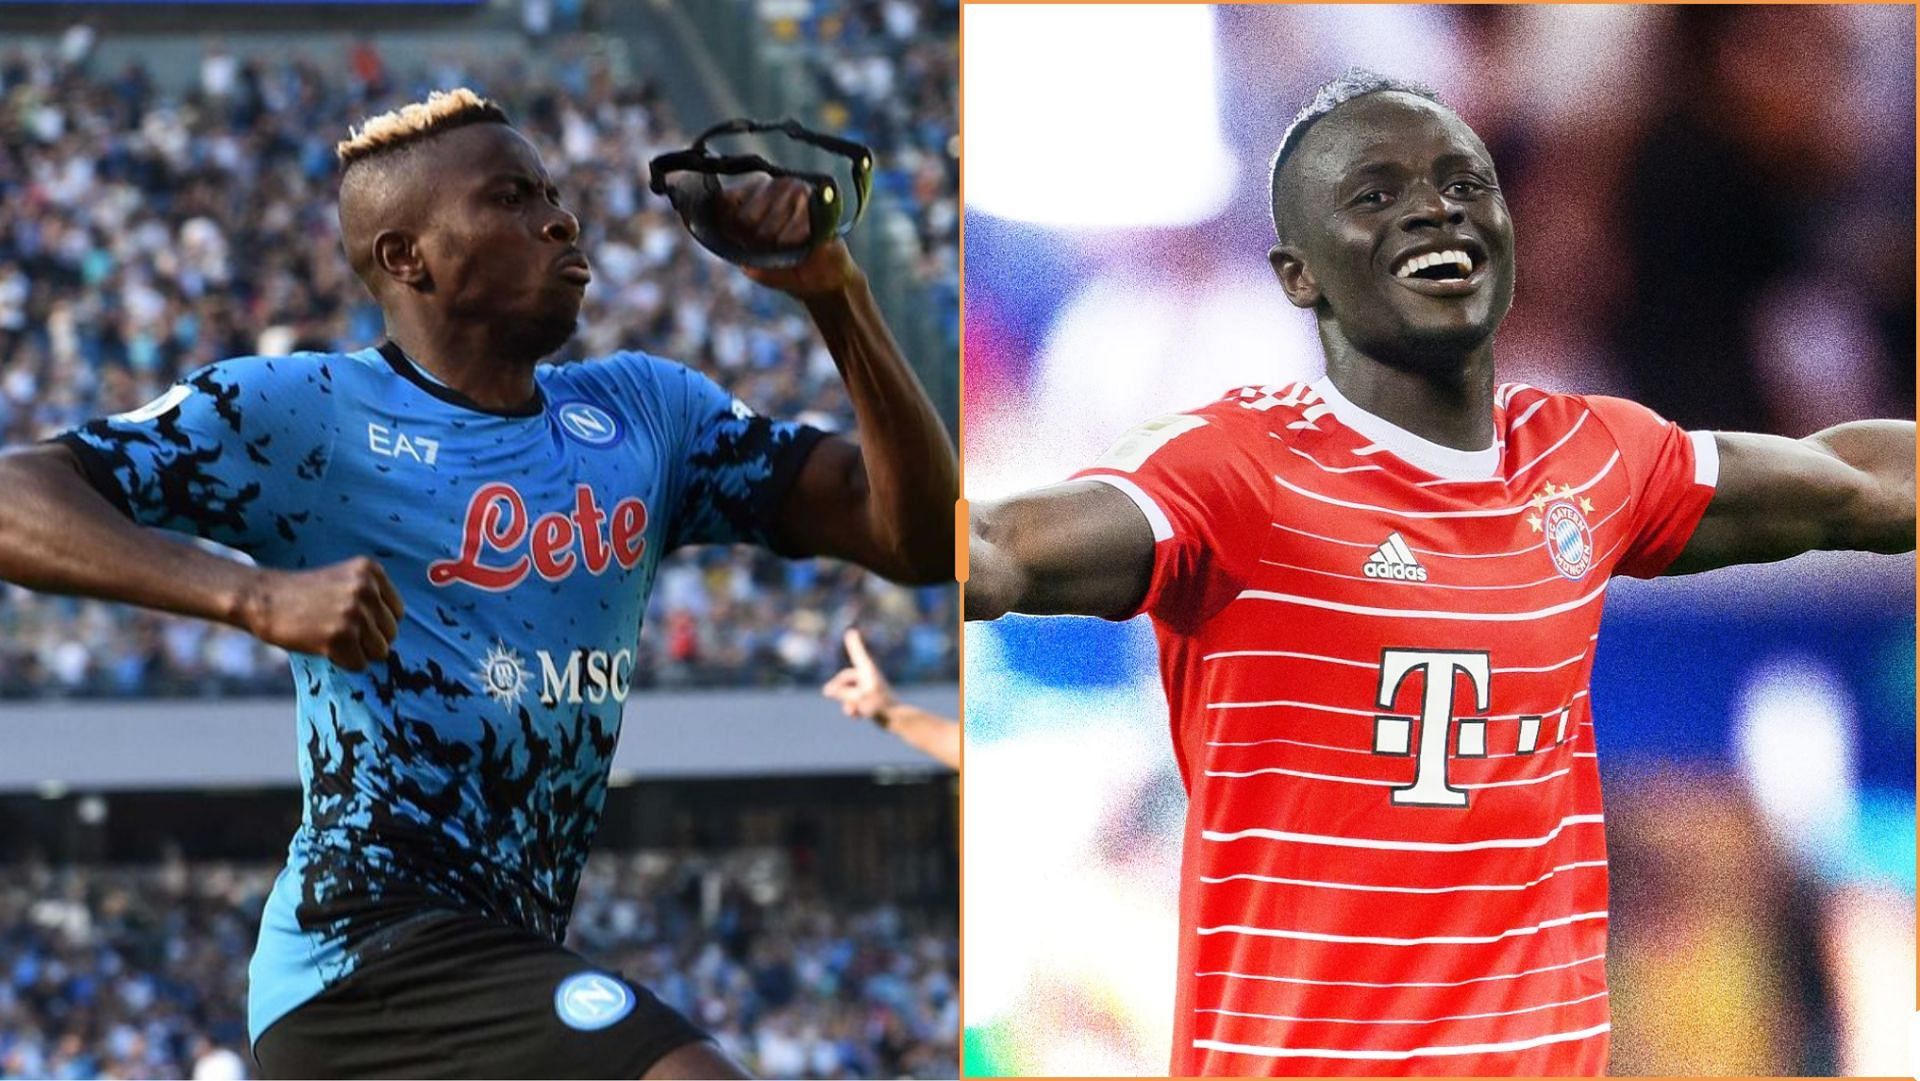 Osimhen and Mane have performed very well during the weekend (Images via Eurosport, GQ)